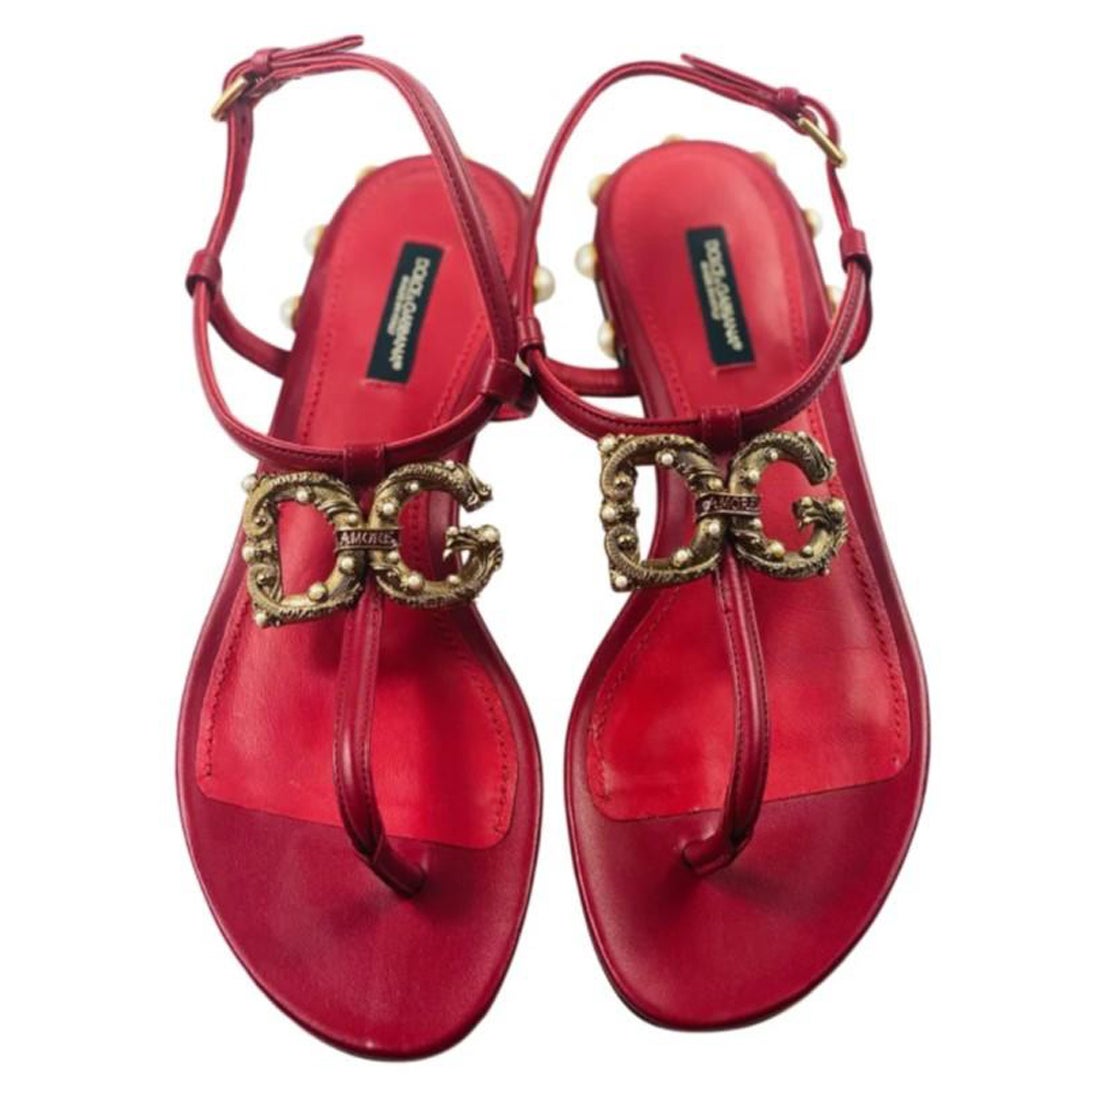 Dolce & Gabbana Red Amore Leather Sandals Shoes Flats Calfskin Gold Logo 